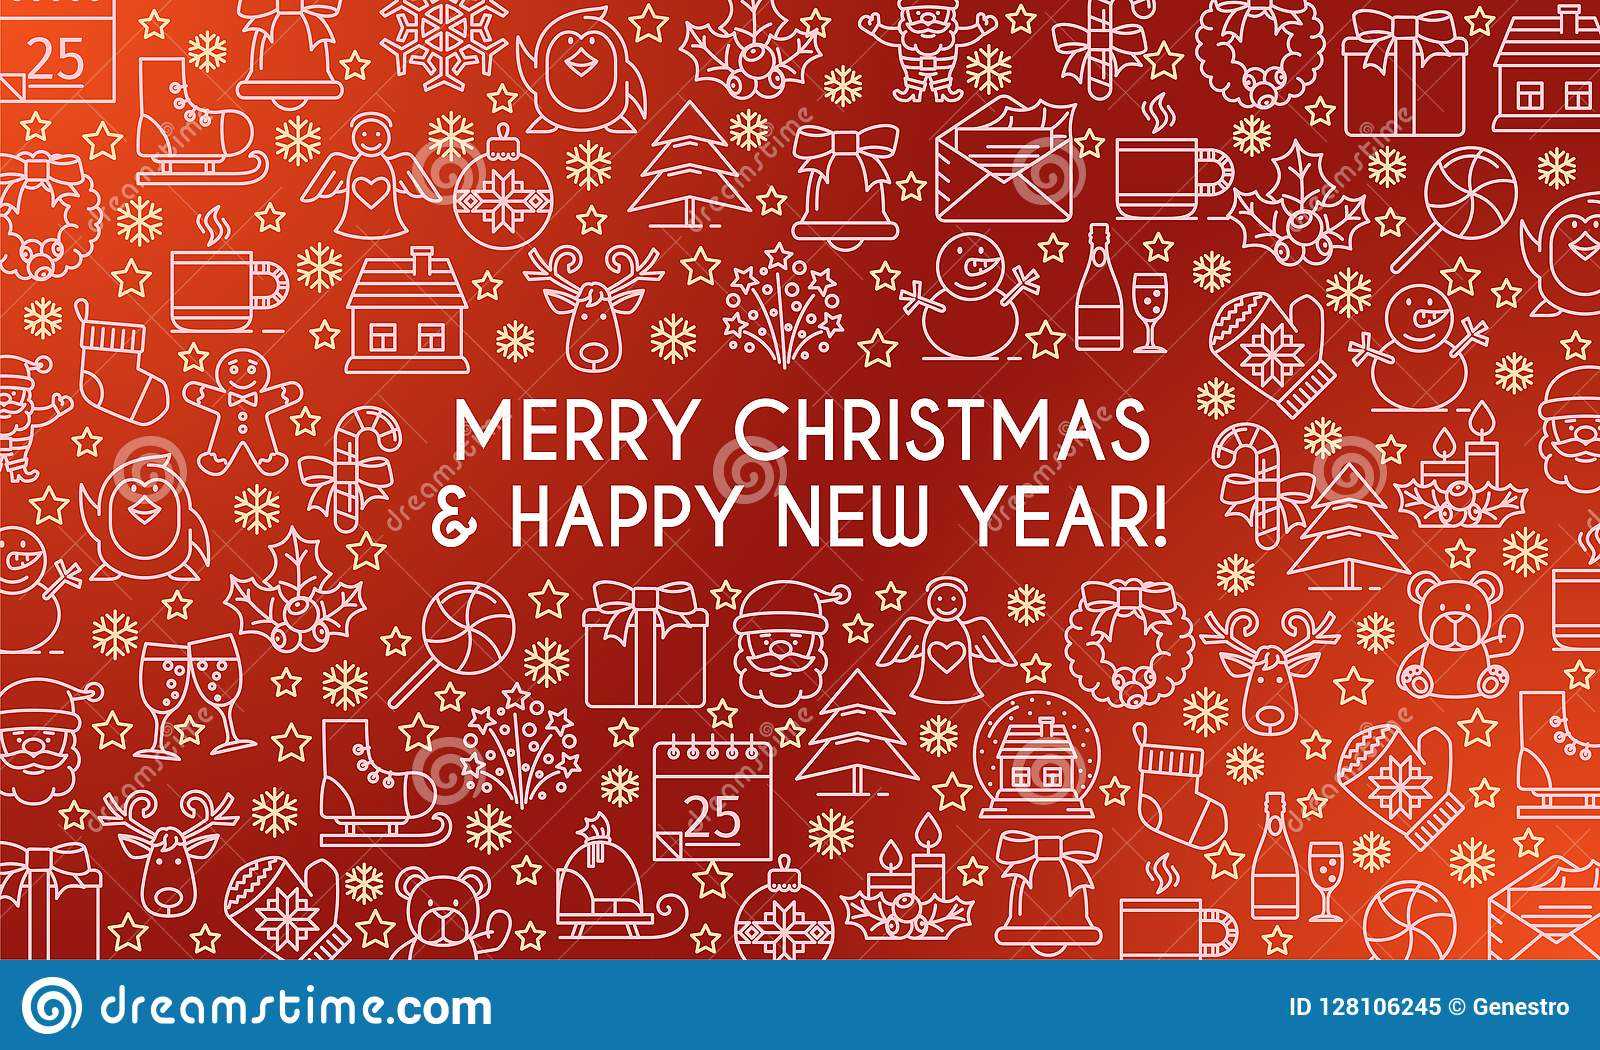 Merry Christmas Banner 02 Stock Vector. Illustration Of With Regard To Merry Christmas Banner Template